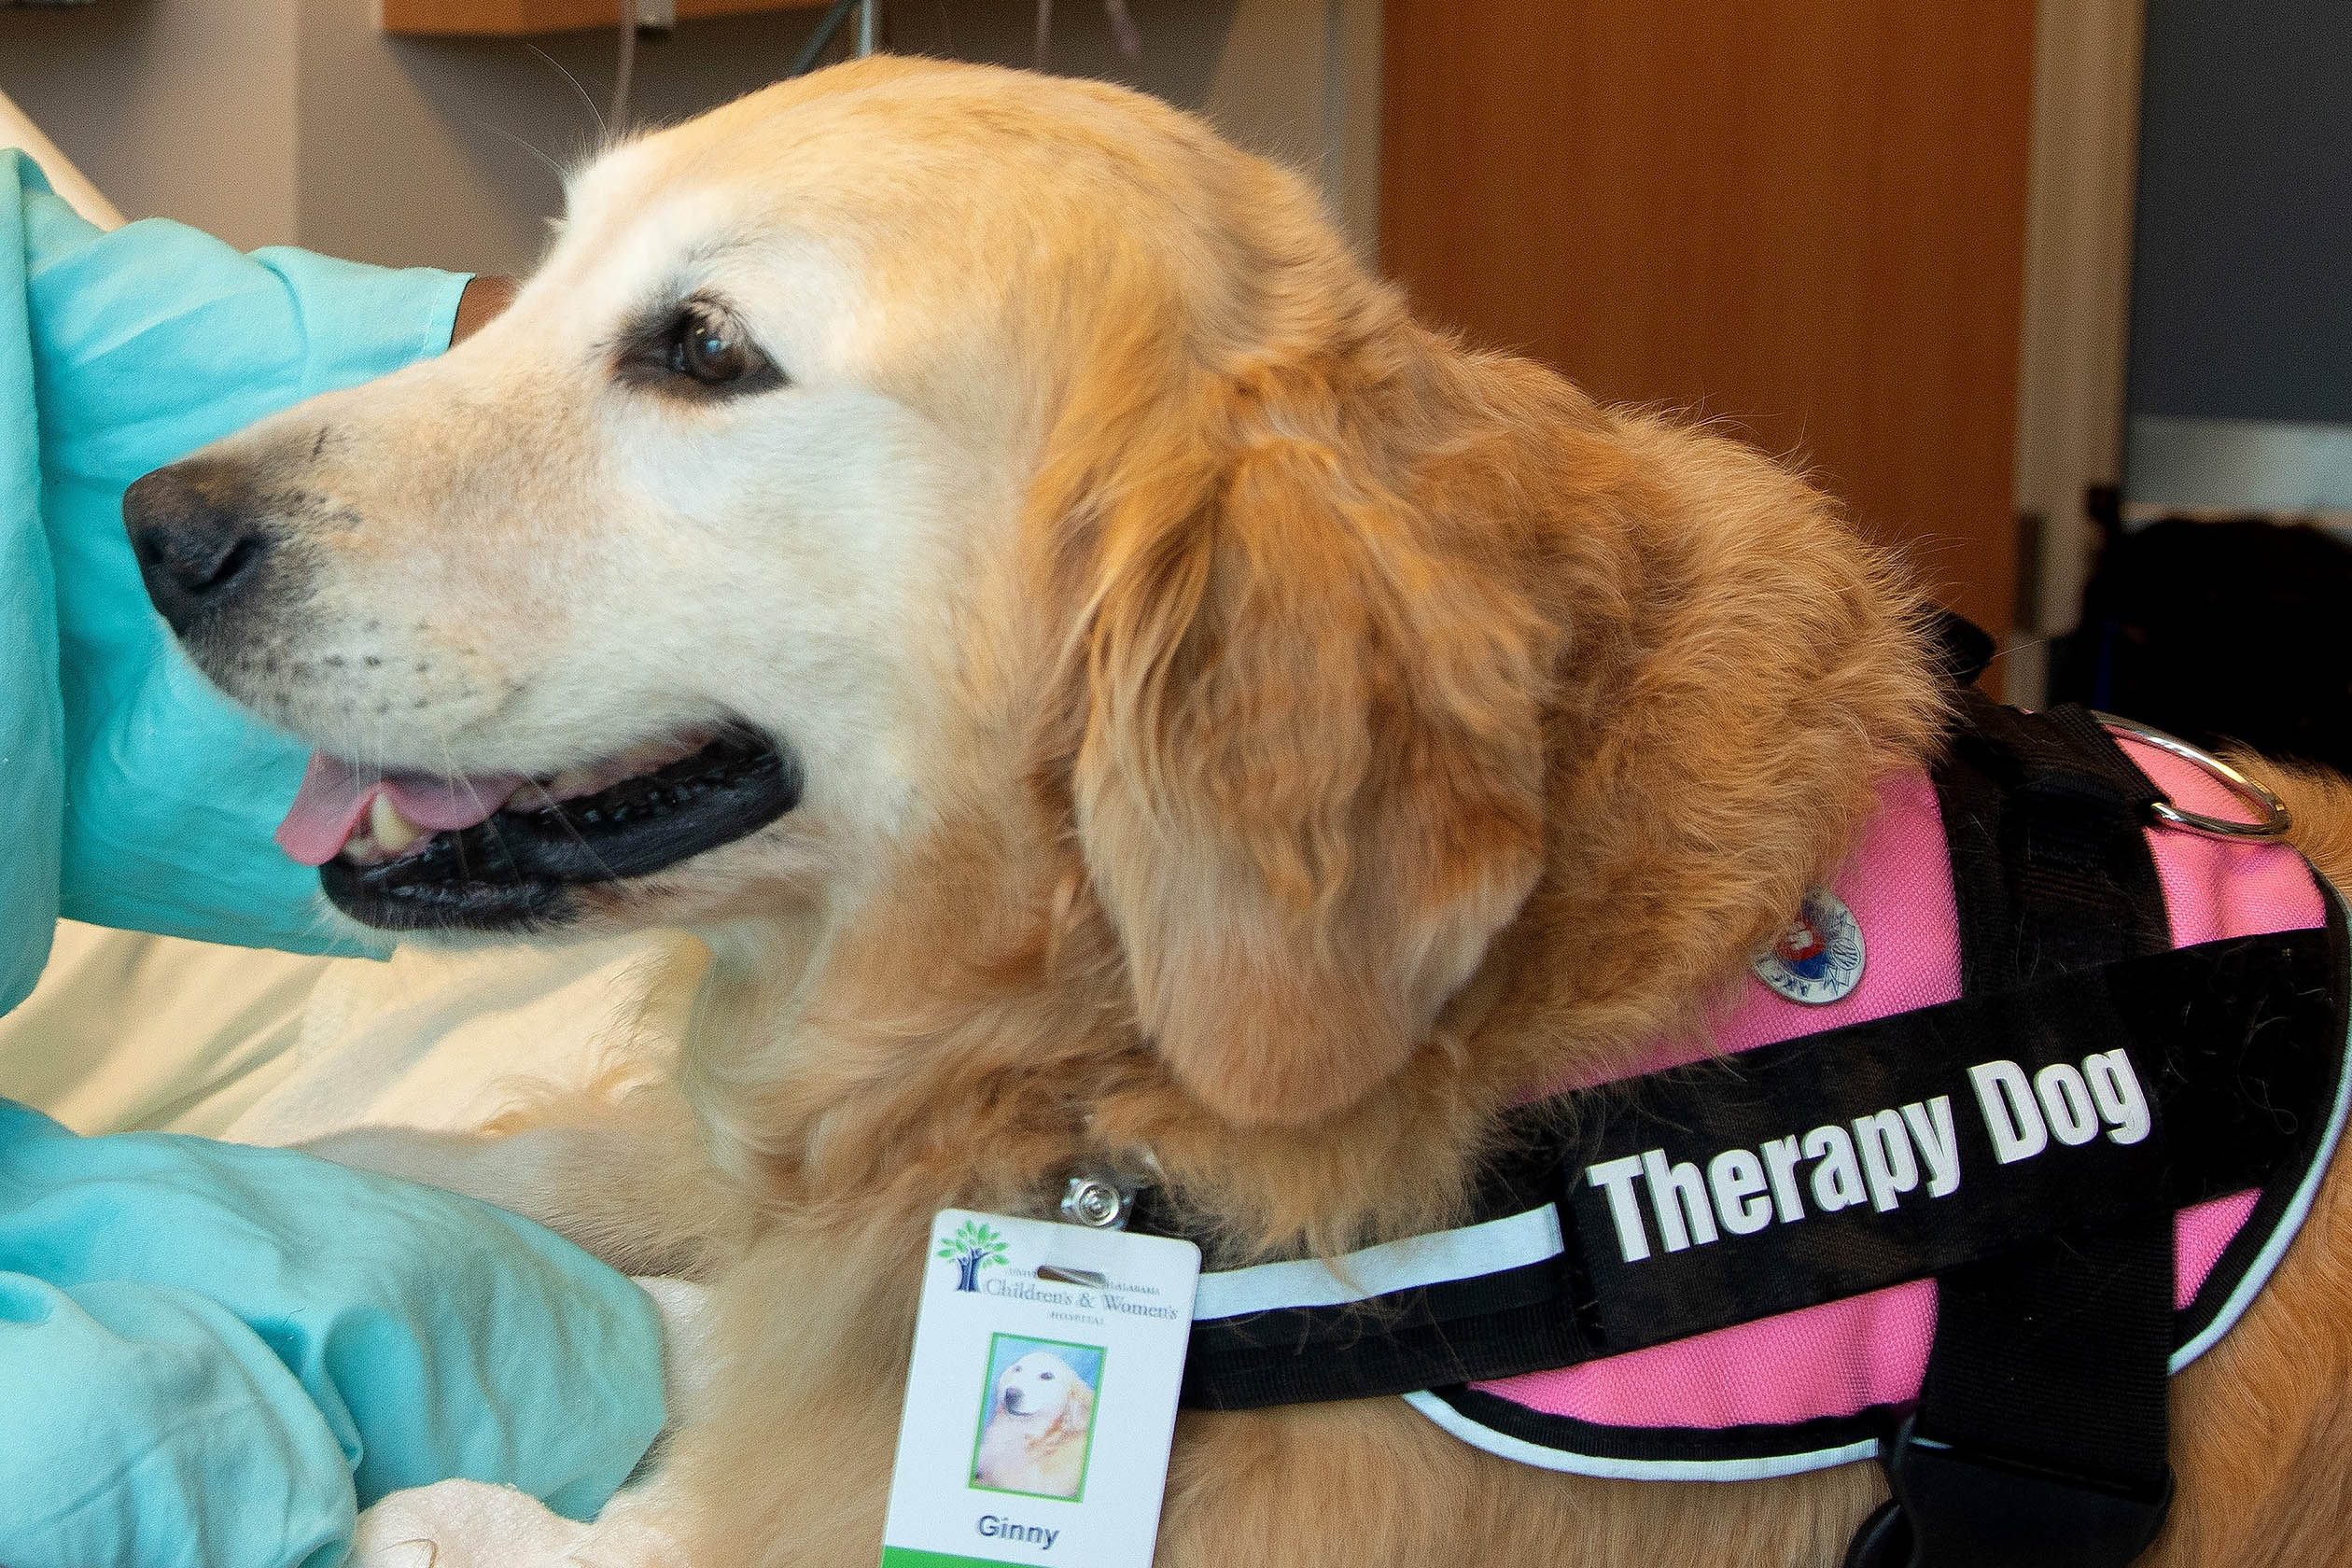 Pet therapy teams needed to visit hospital patients and staff | USA Health